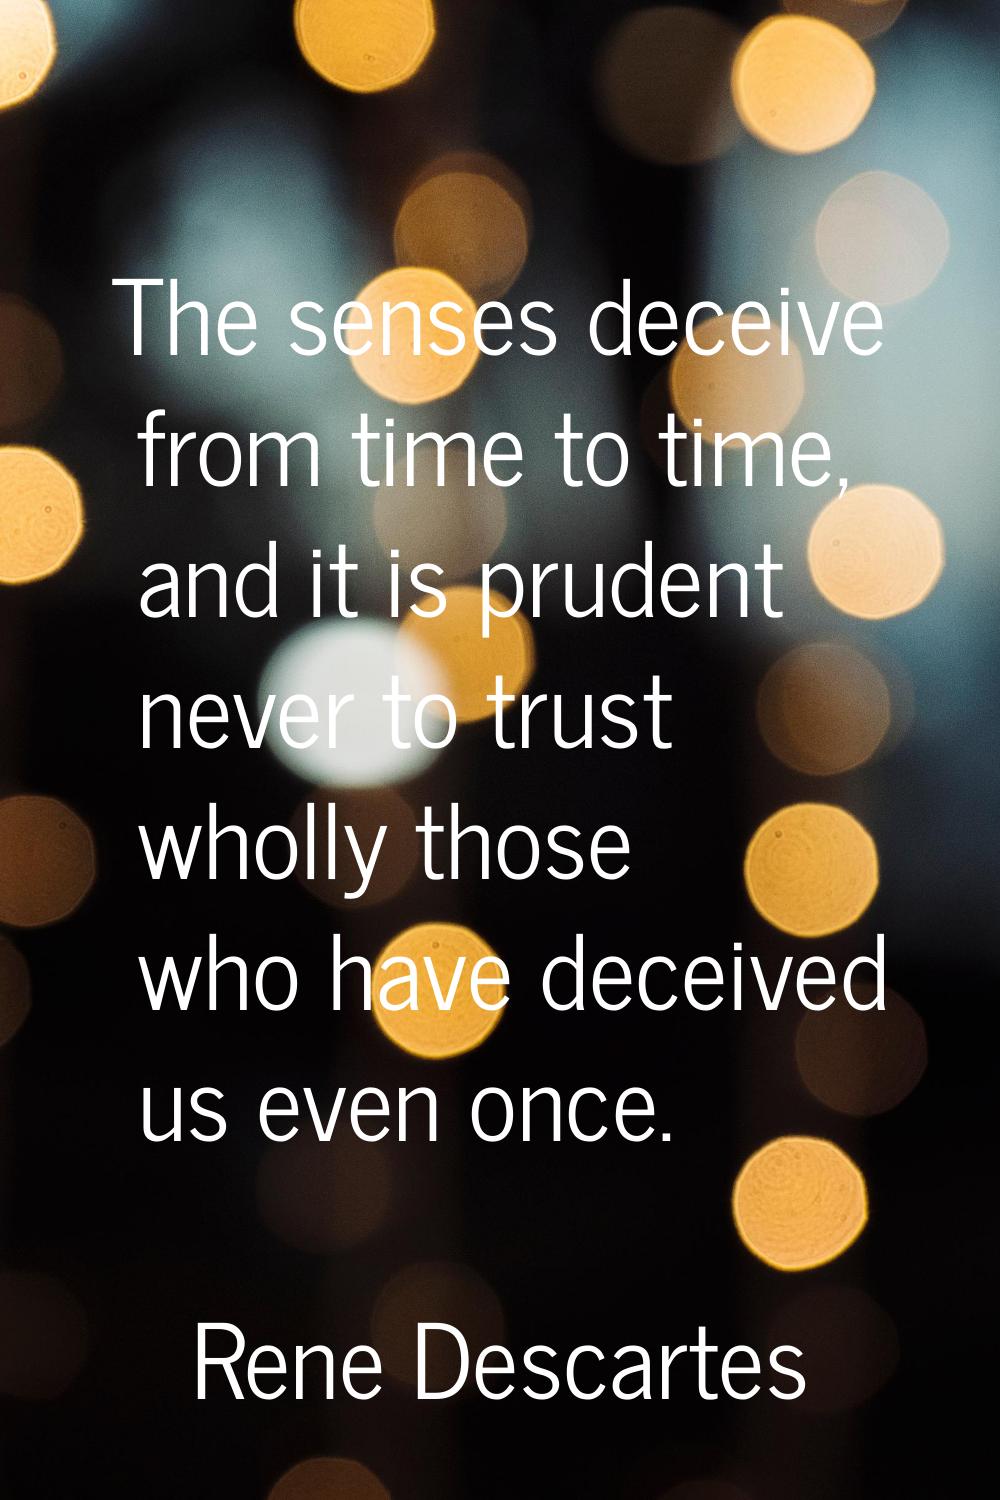 The senses deceive from time to time, and it is prudent never to trust wholly those who have deceiv